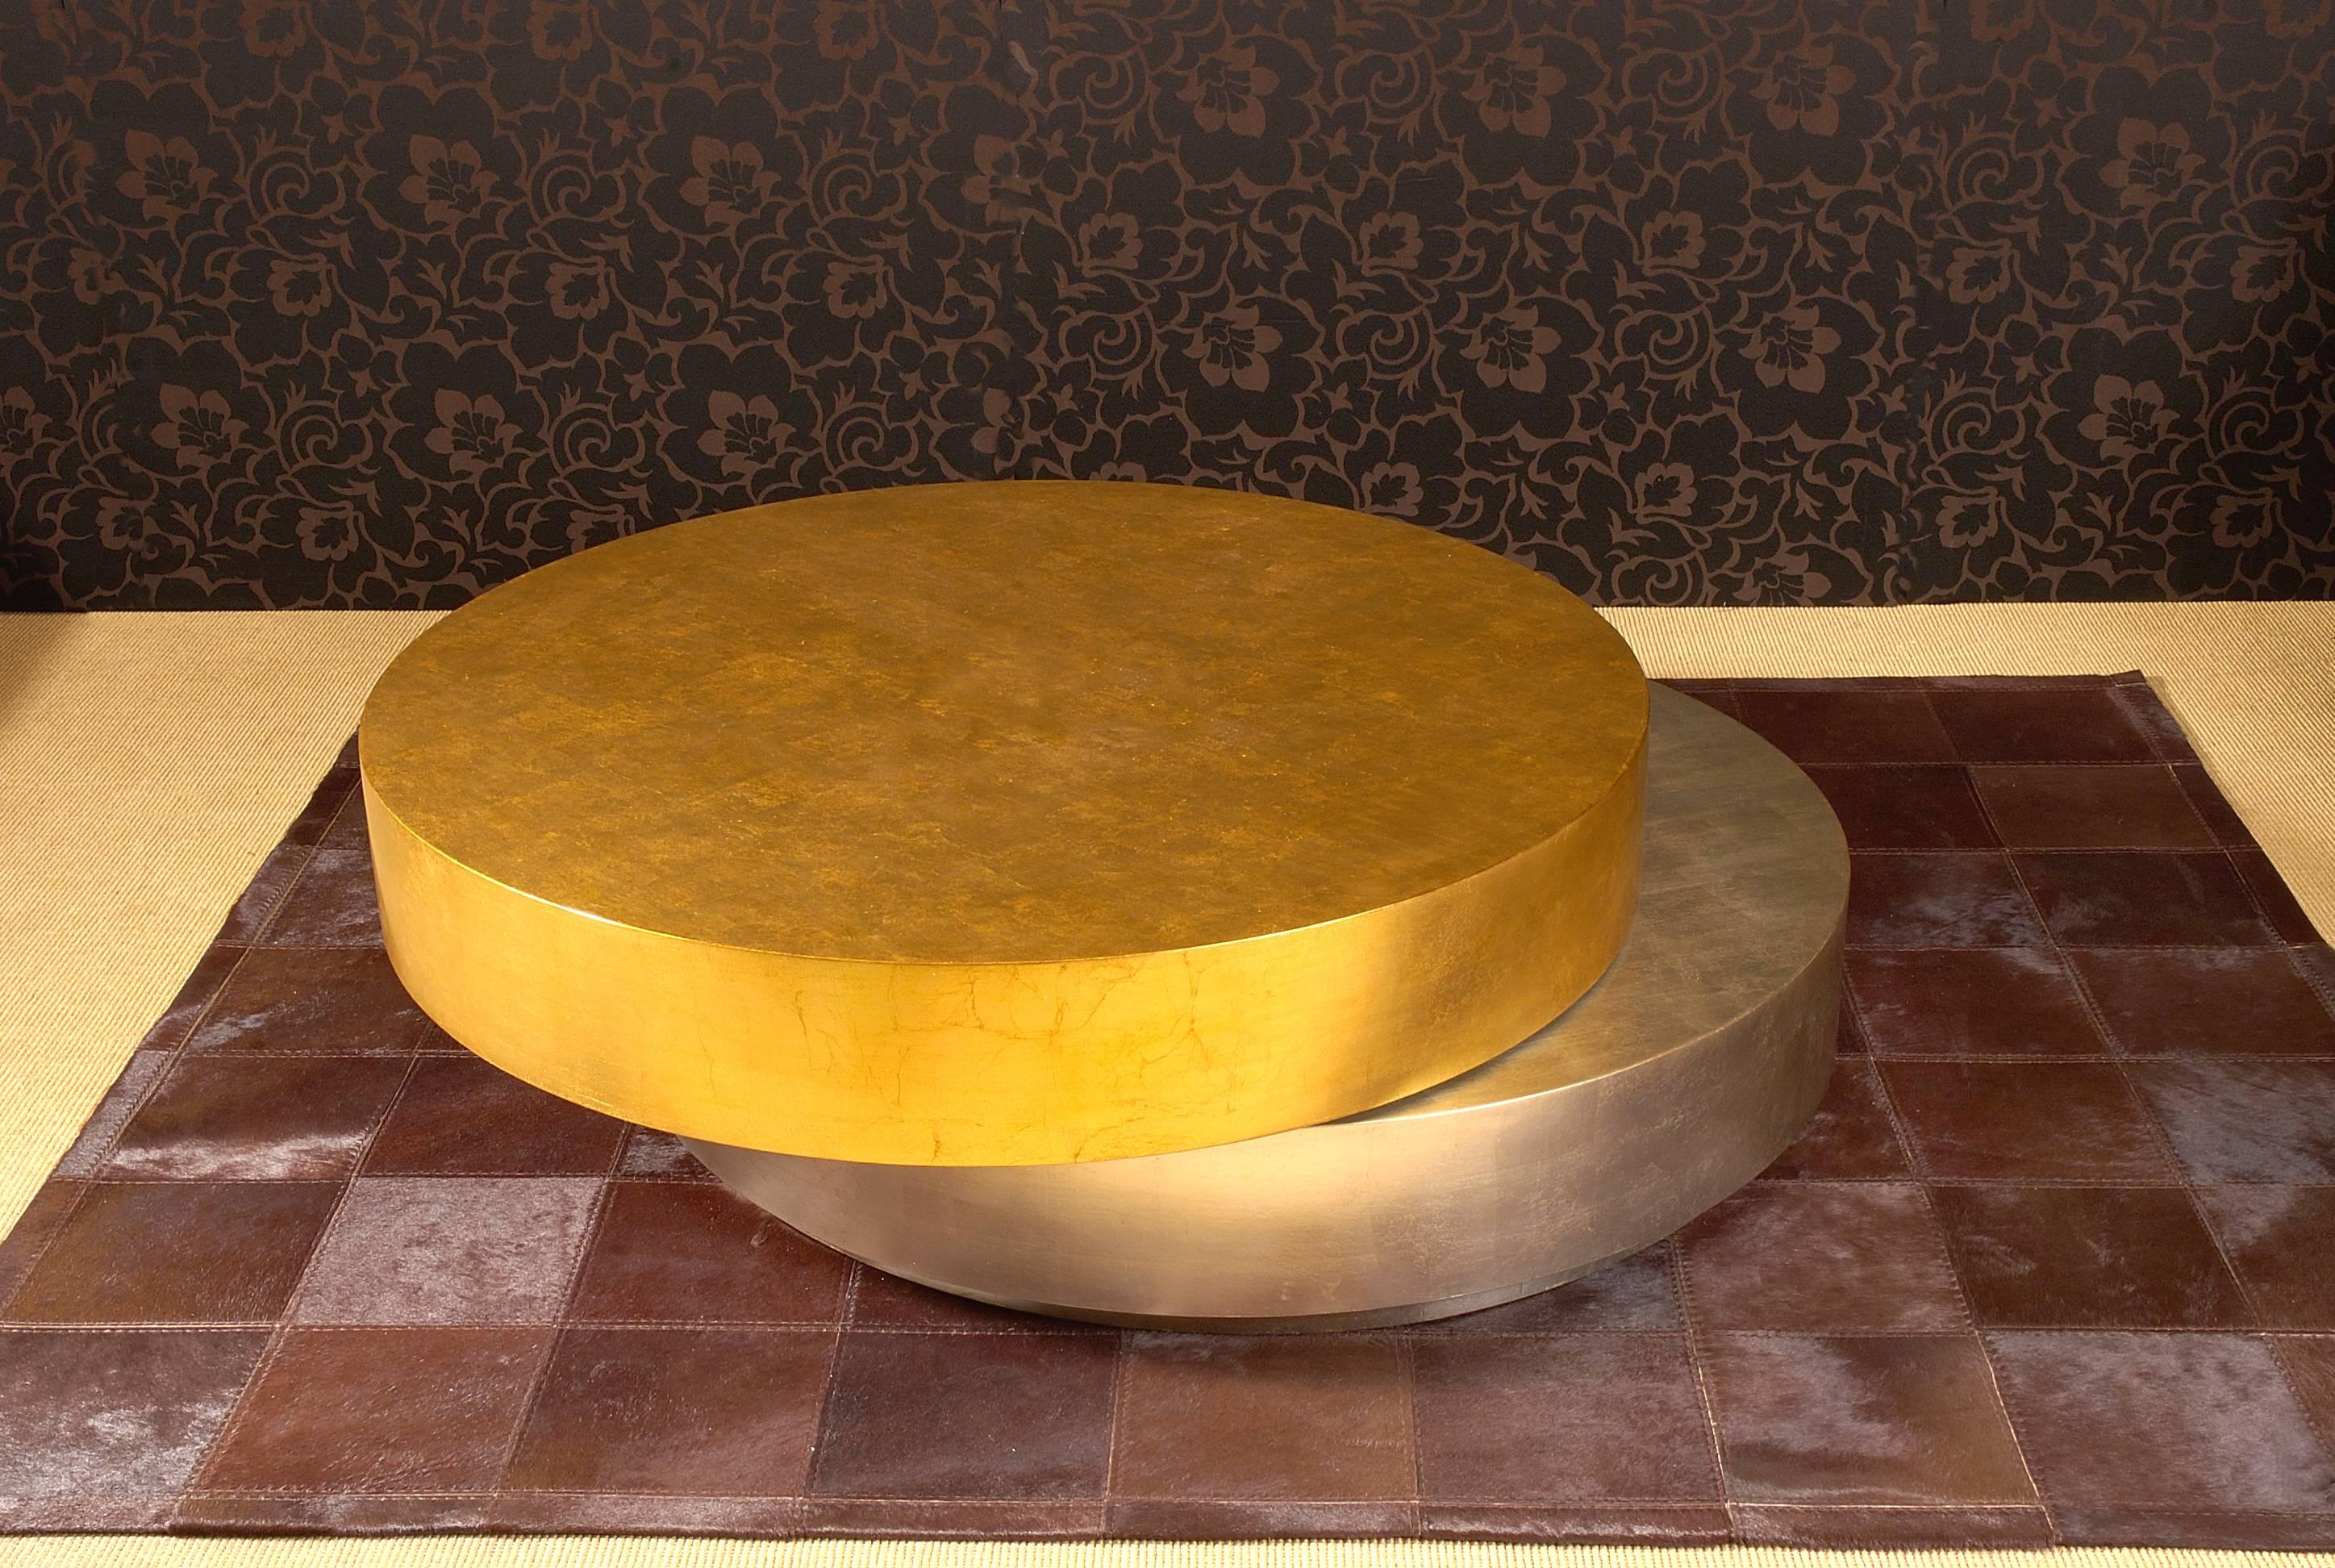 Coffee table composed of two same-sized circles, the upper circle can be rotated and make double exposed discs. The structure is in wood. 
The top circle finishing is in gold leaf and the below circle finishing is in silver leaf.
The open measure is